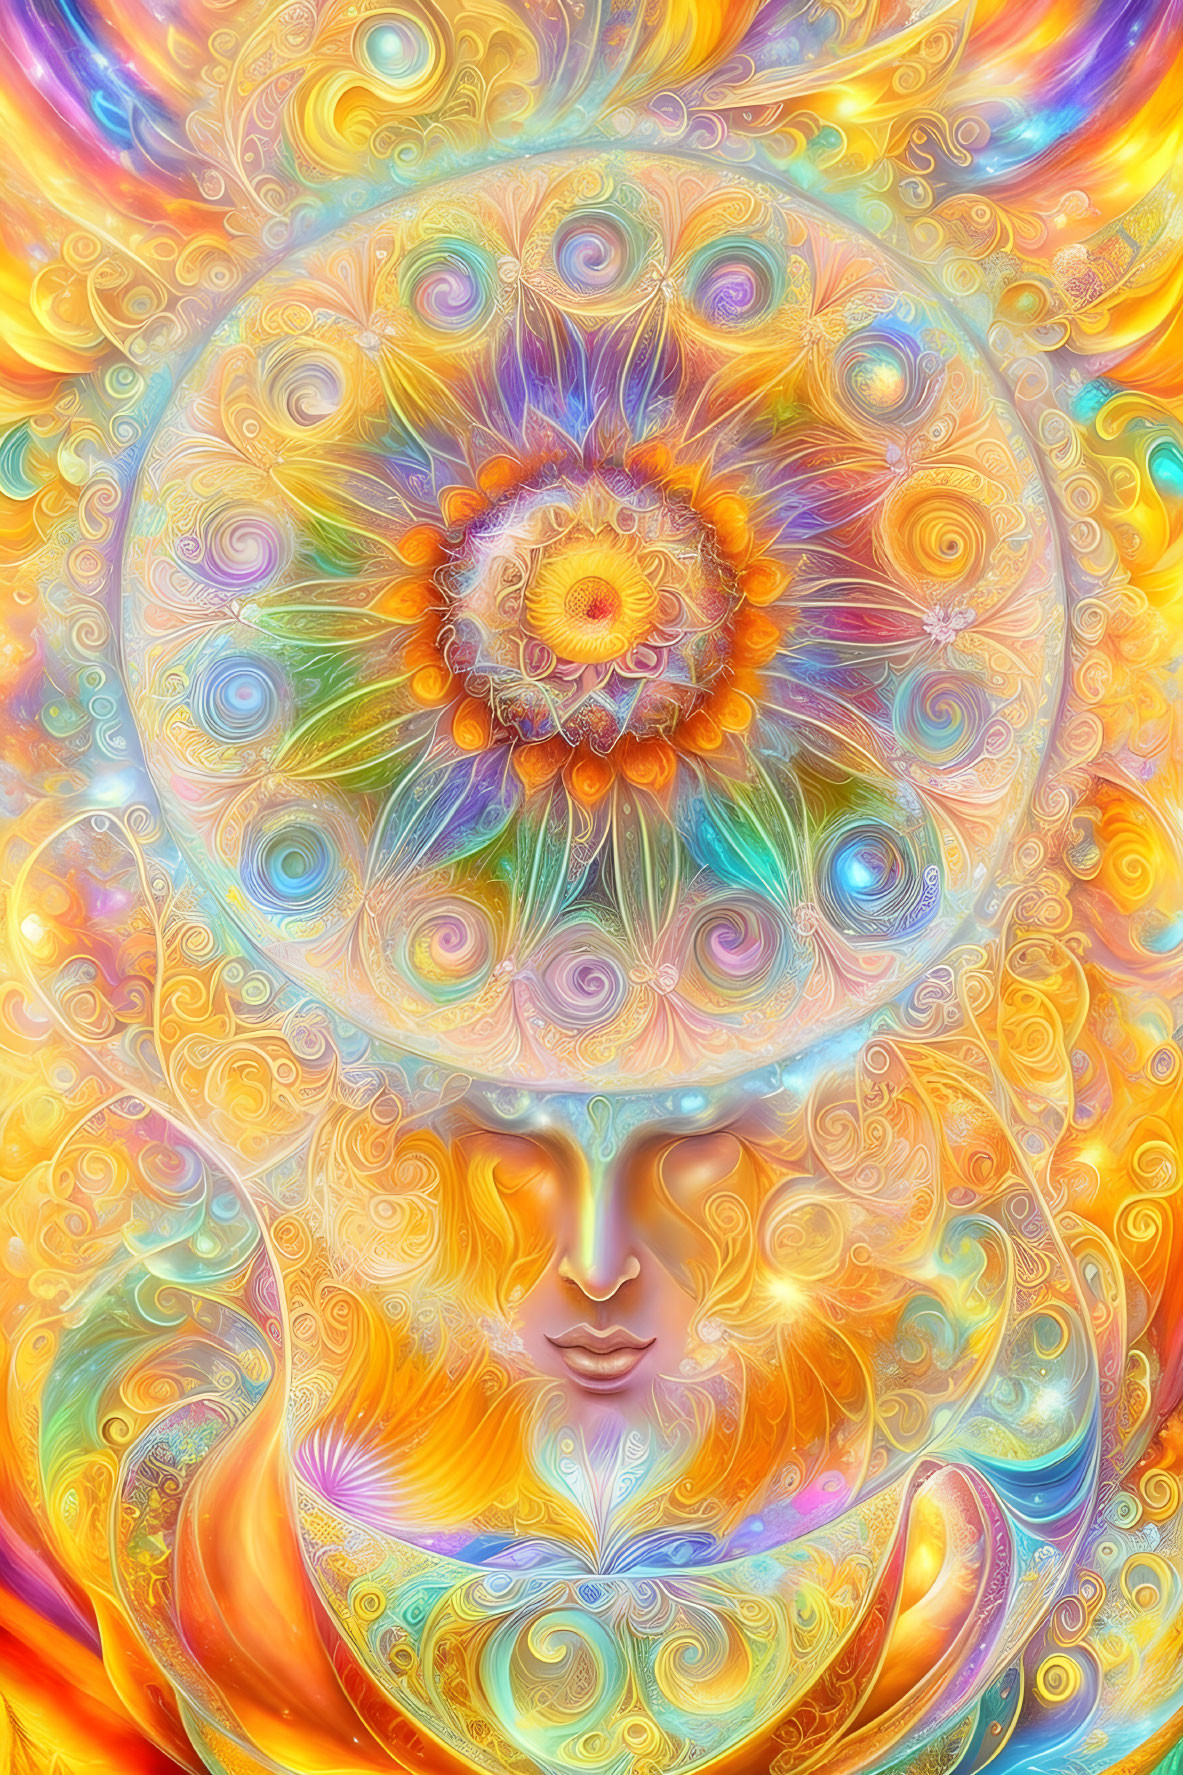 Colorful psychedelic portrait with serene face and third eye.